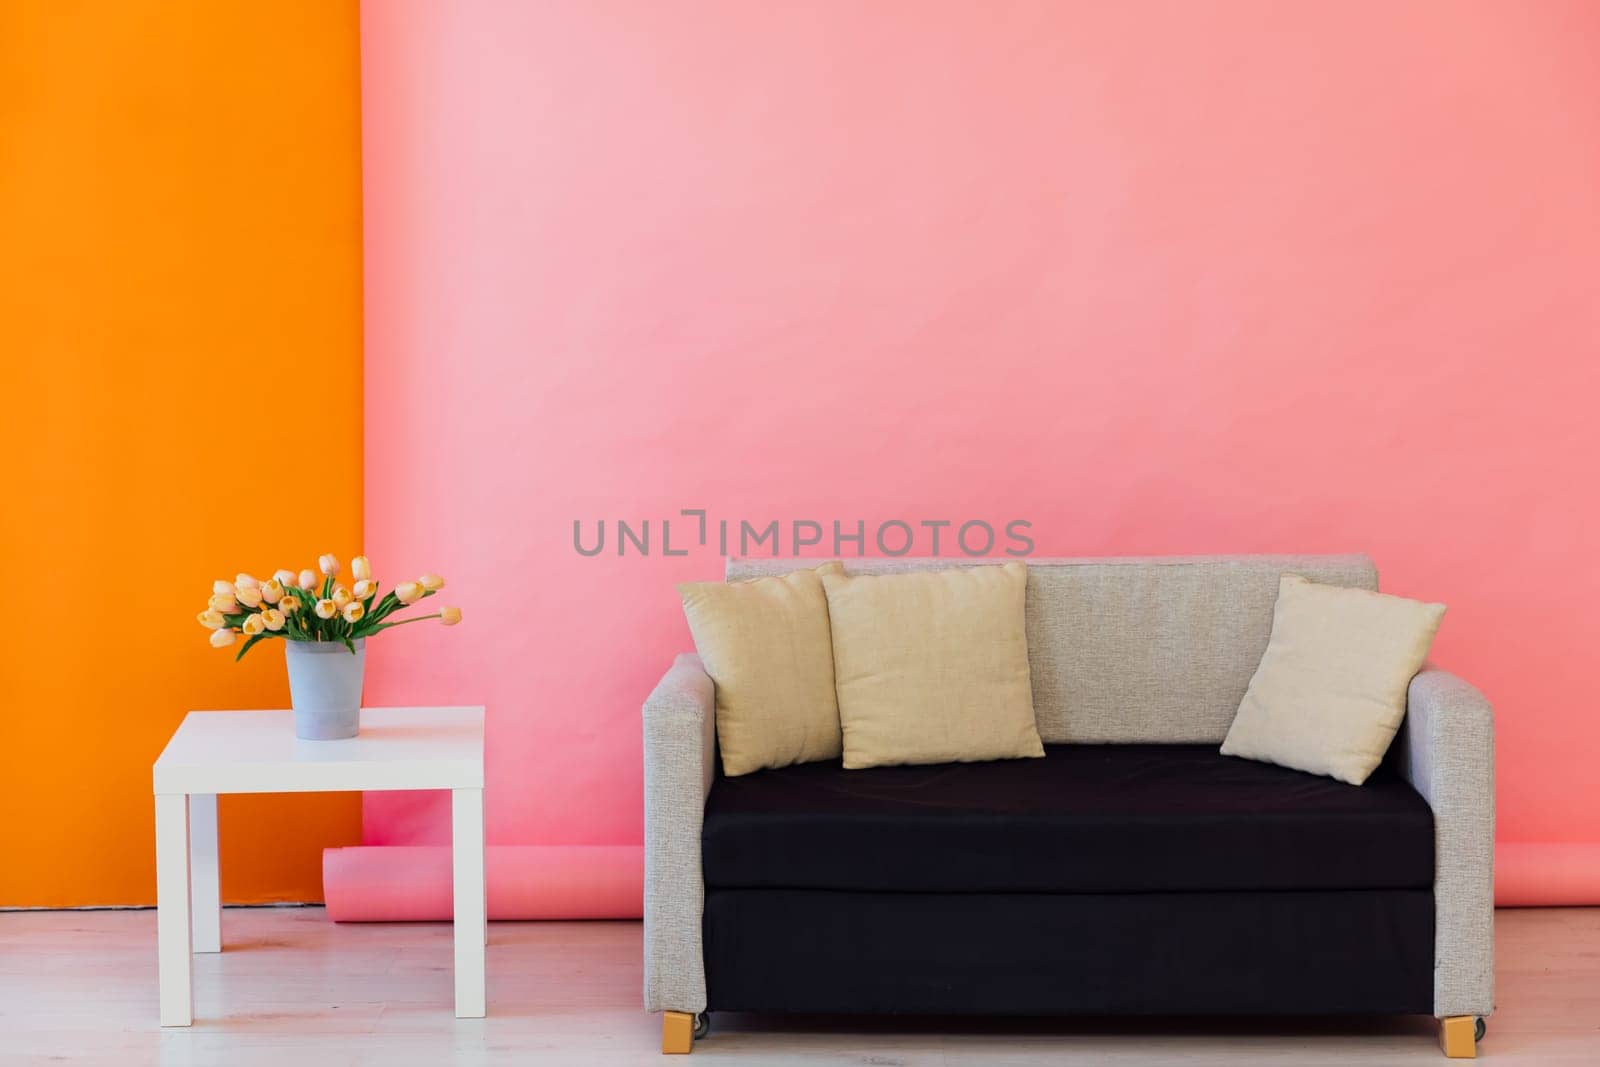 Black and grey office sofa in the interior of a multicolored room by Simakov